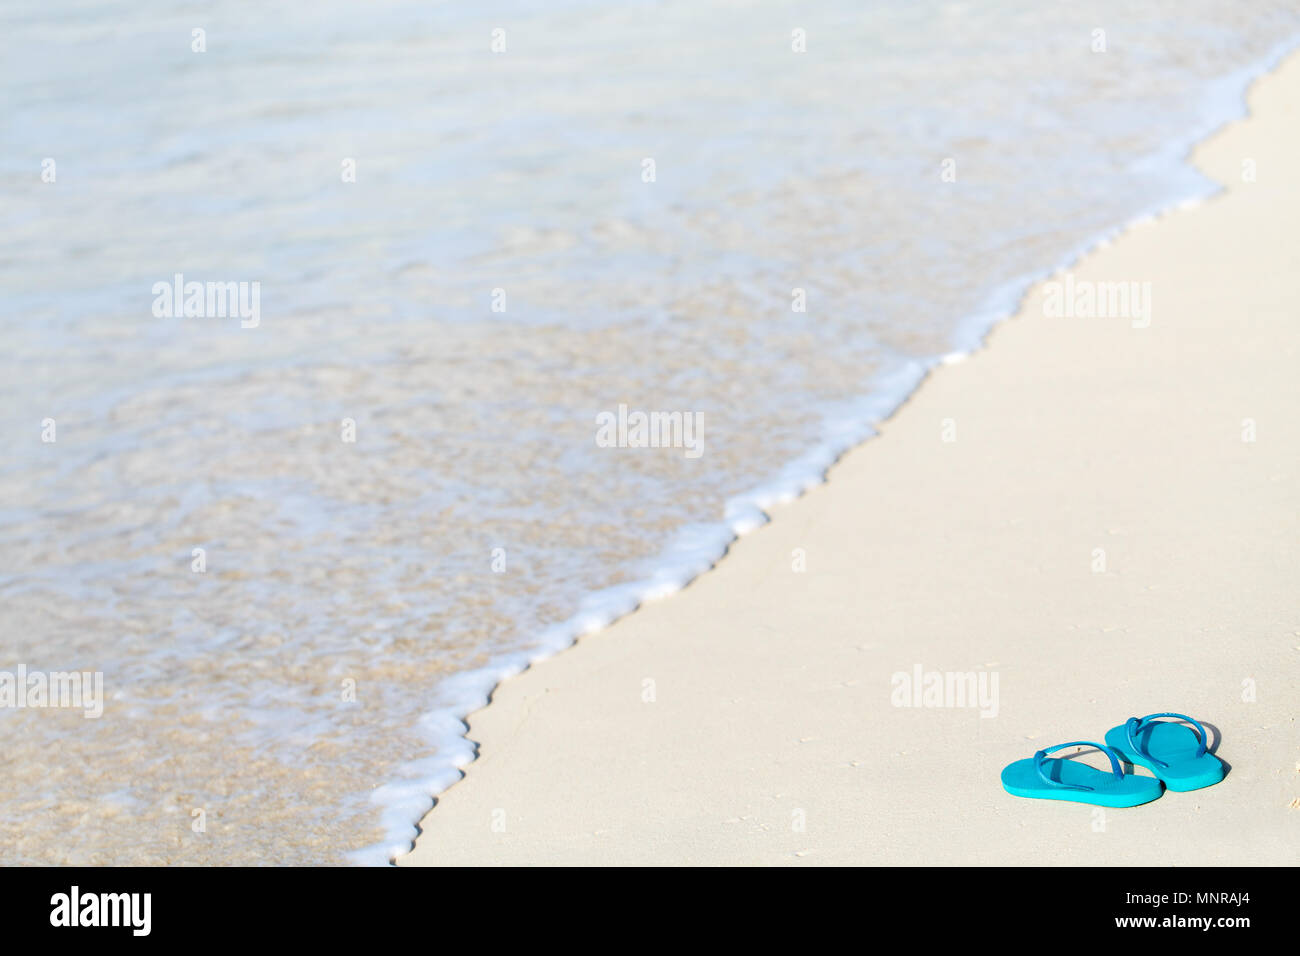 Turquoise flip flops on a tropical beach Stock Photo - Alamy